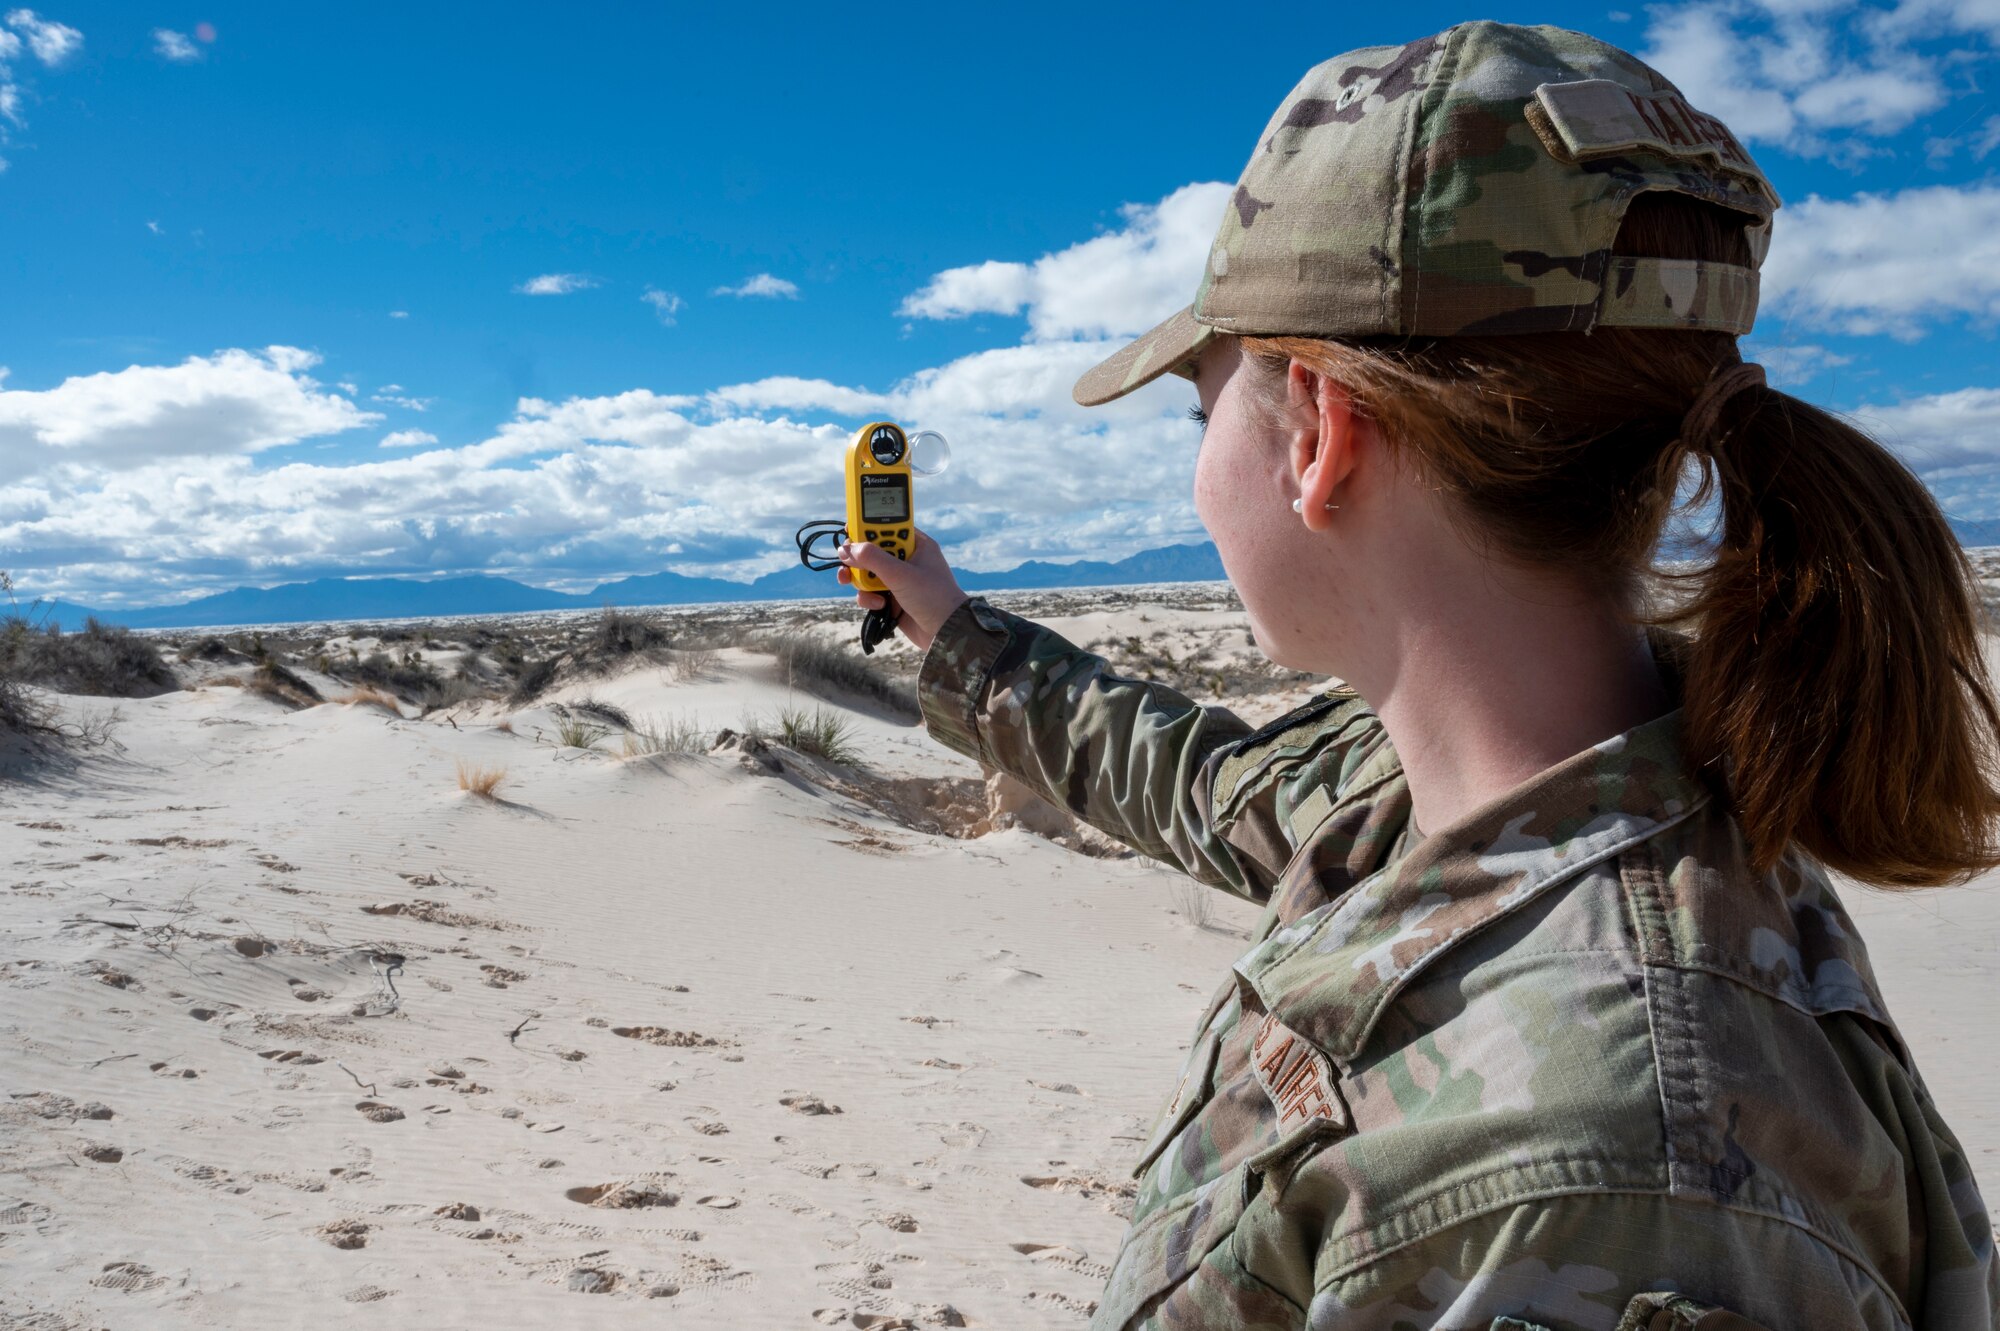 U.S. Air Force Airman Melody Kaiser, 54th Operations Support Squadron weather apprentice, takes meteorological measurements during an exercise at Holloman Air Force Base, New Mexico, Jan. 22, 2024. The 54th OSS provides the base with past, present and future weather observations that are crucial to providing the surrounding squadrons and units with air superiority. (U.S Air Force photo by Airman 1st Class Isaiah Pedrazzini)